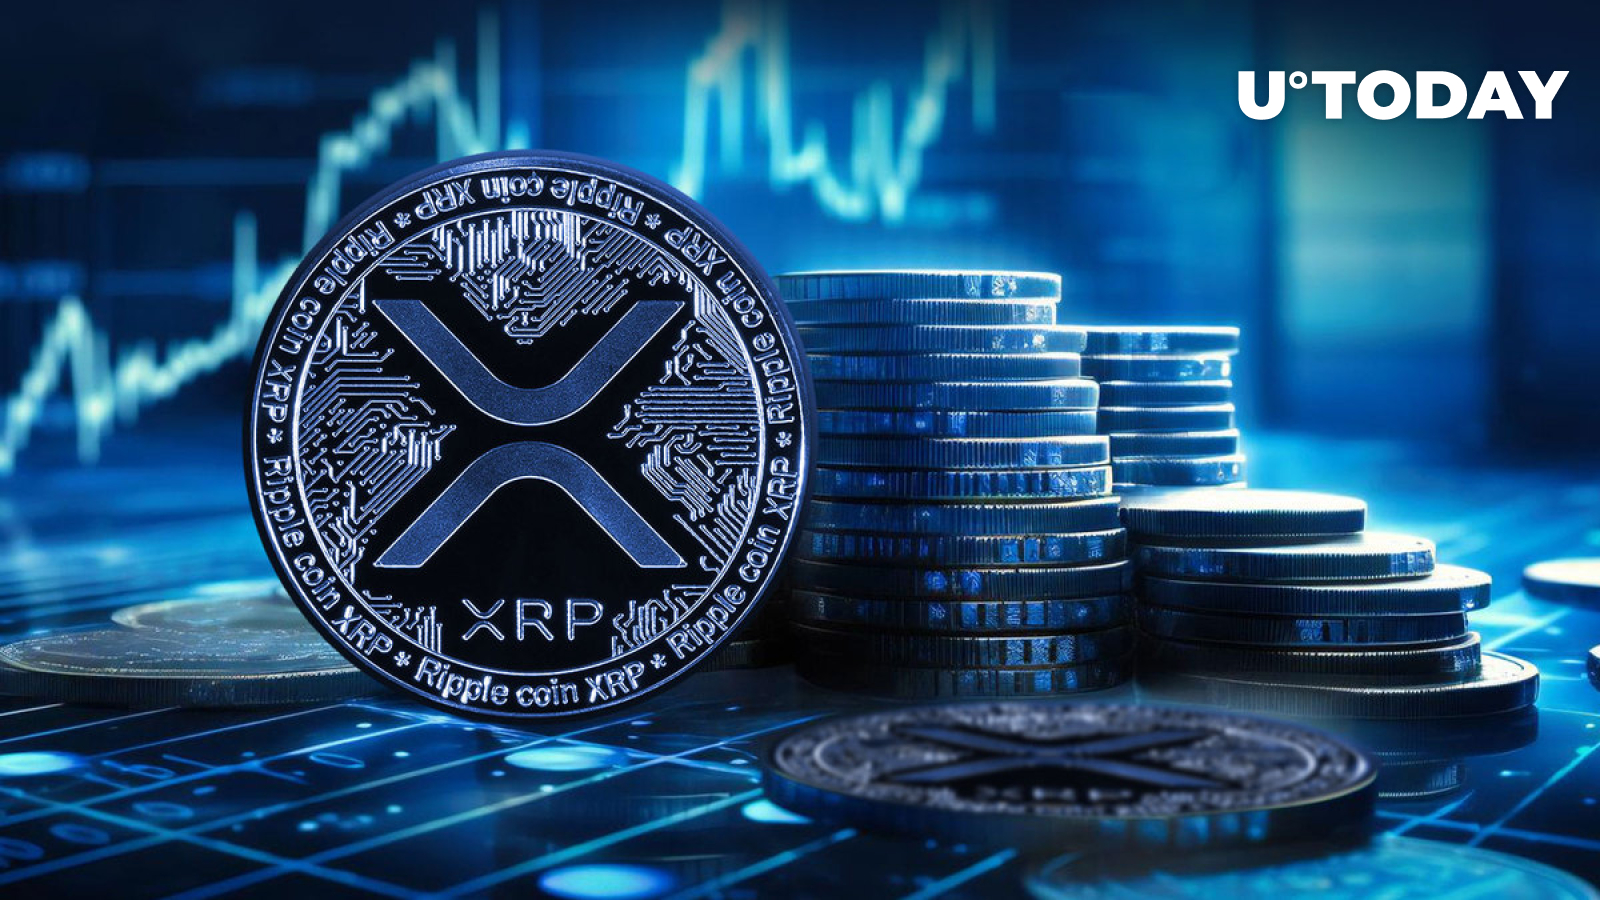 XRP Up 100% in Fund Inflows Last Year, But It Is Far From Maximum